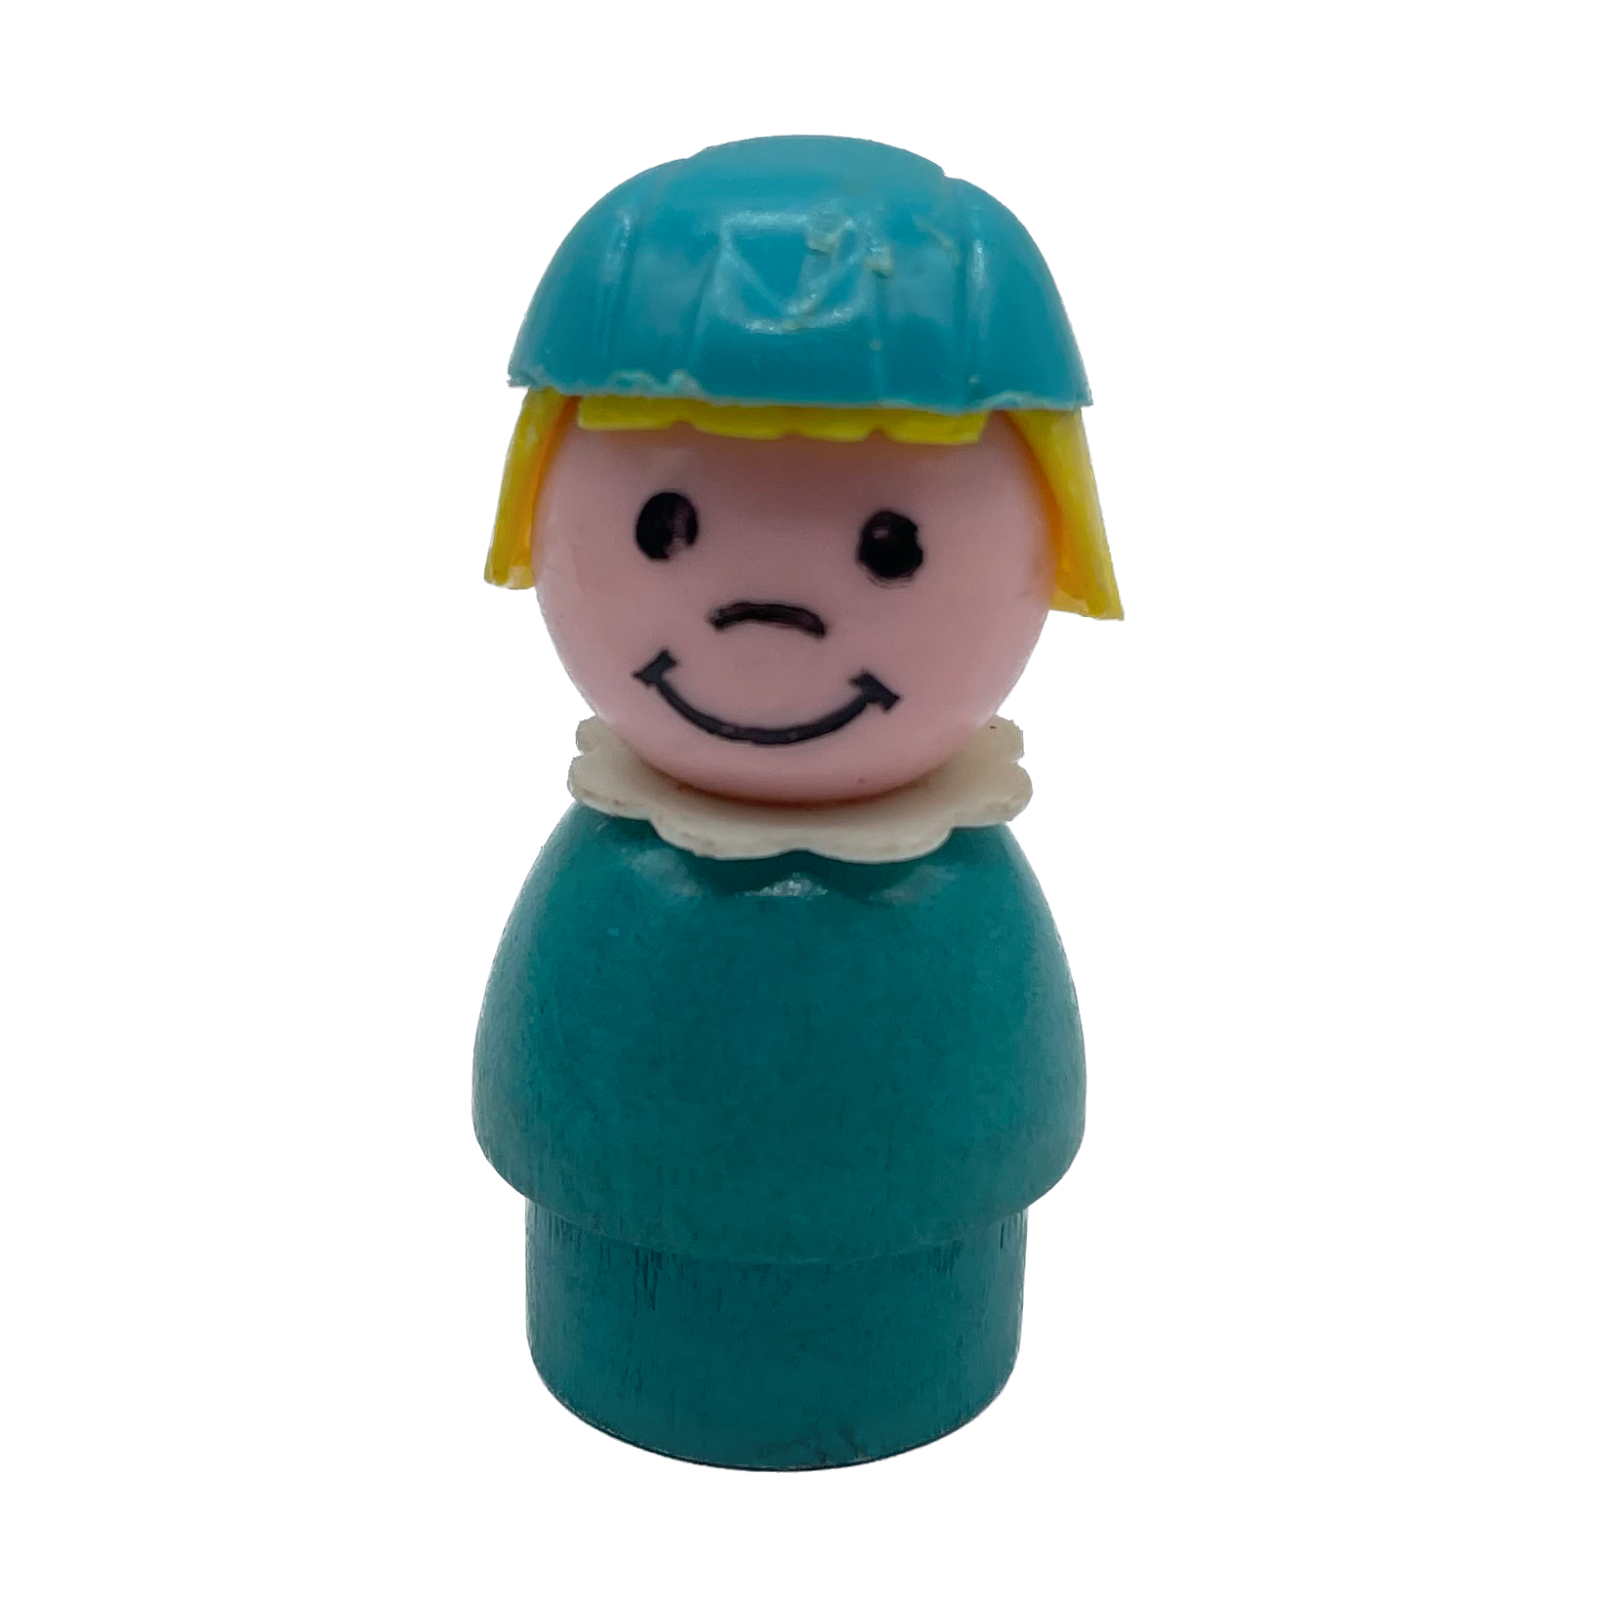 Vintage 1970s Fisher Price Little People Stewardess from Airport Family Play Set - $12.37